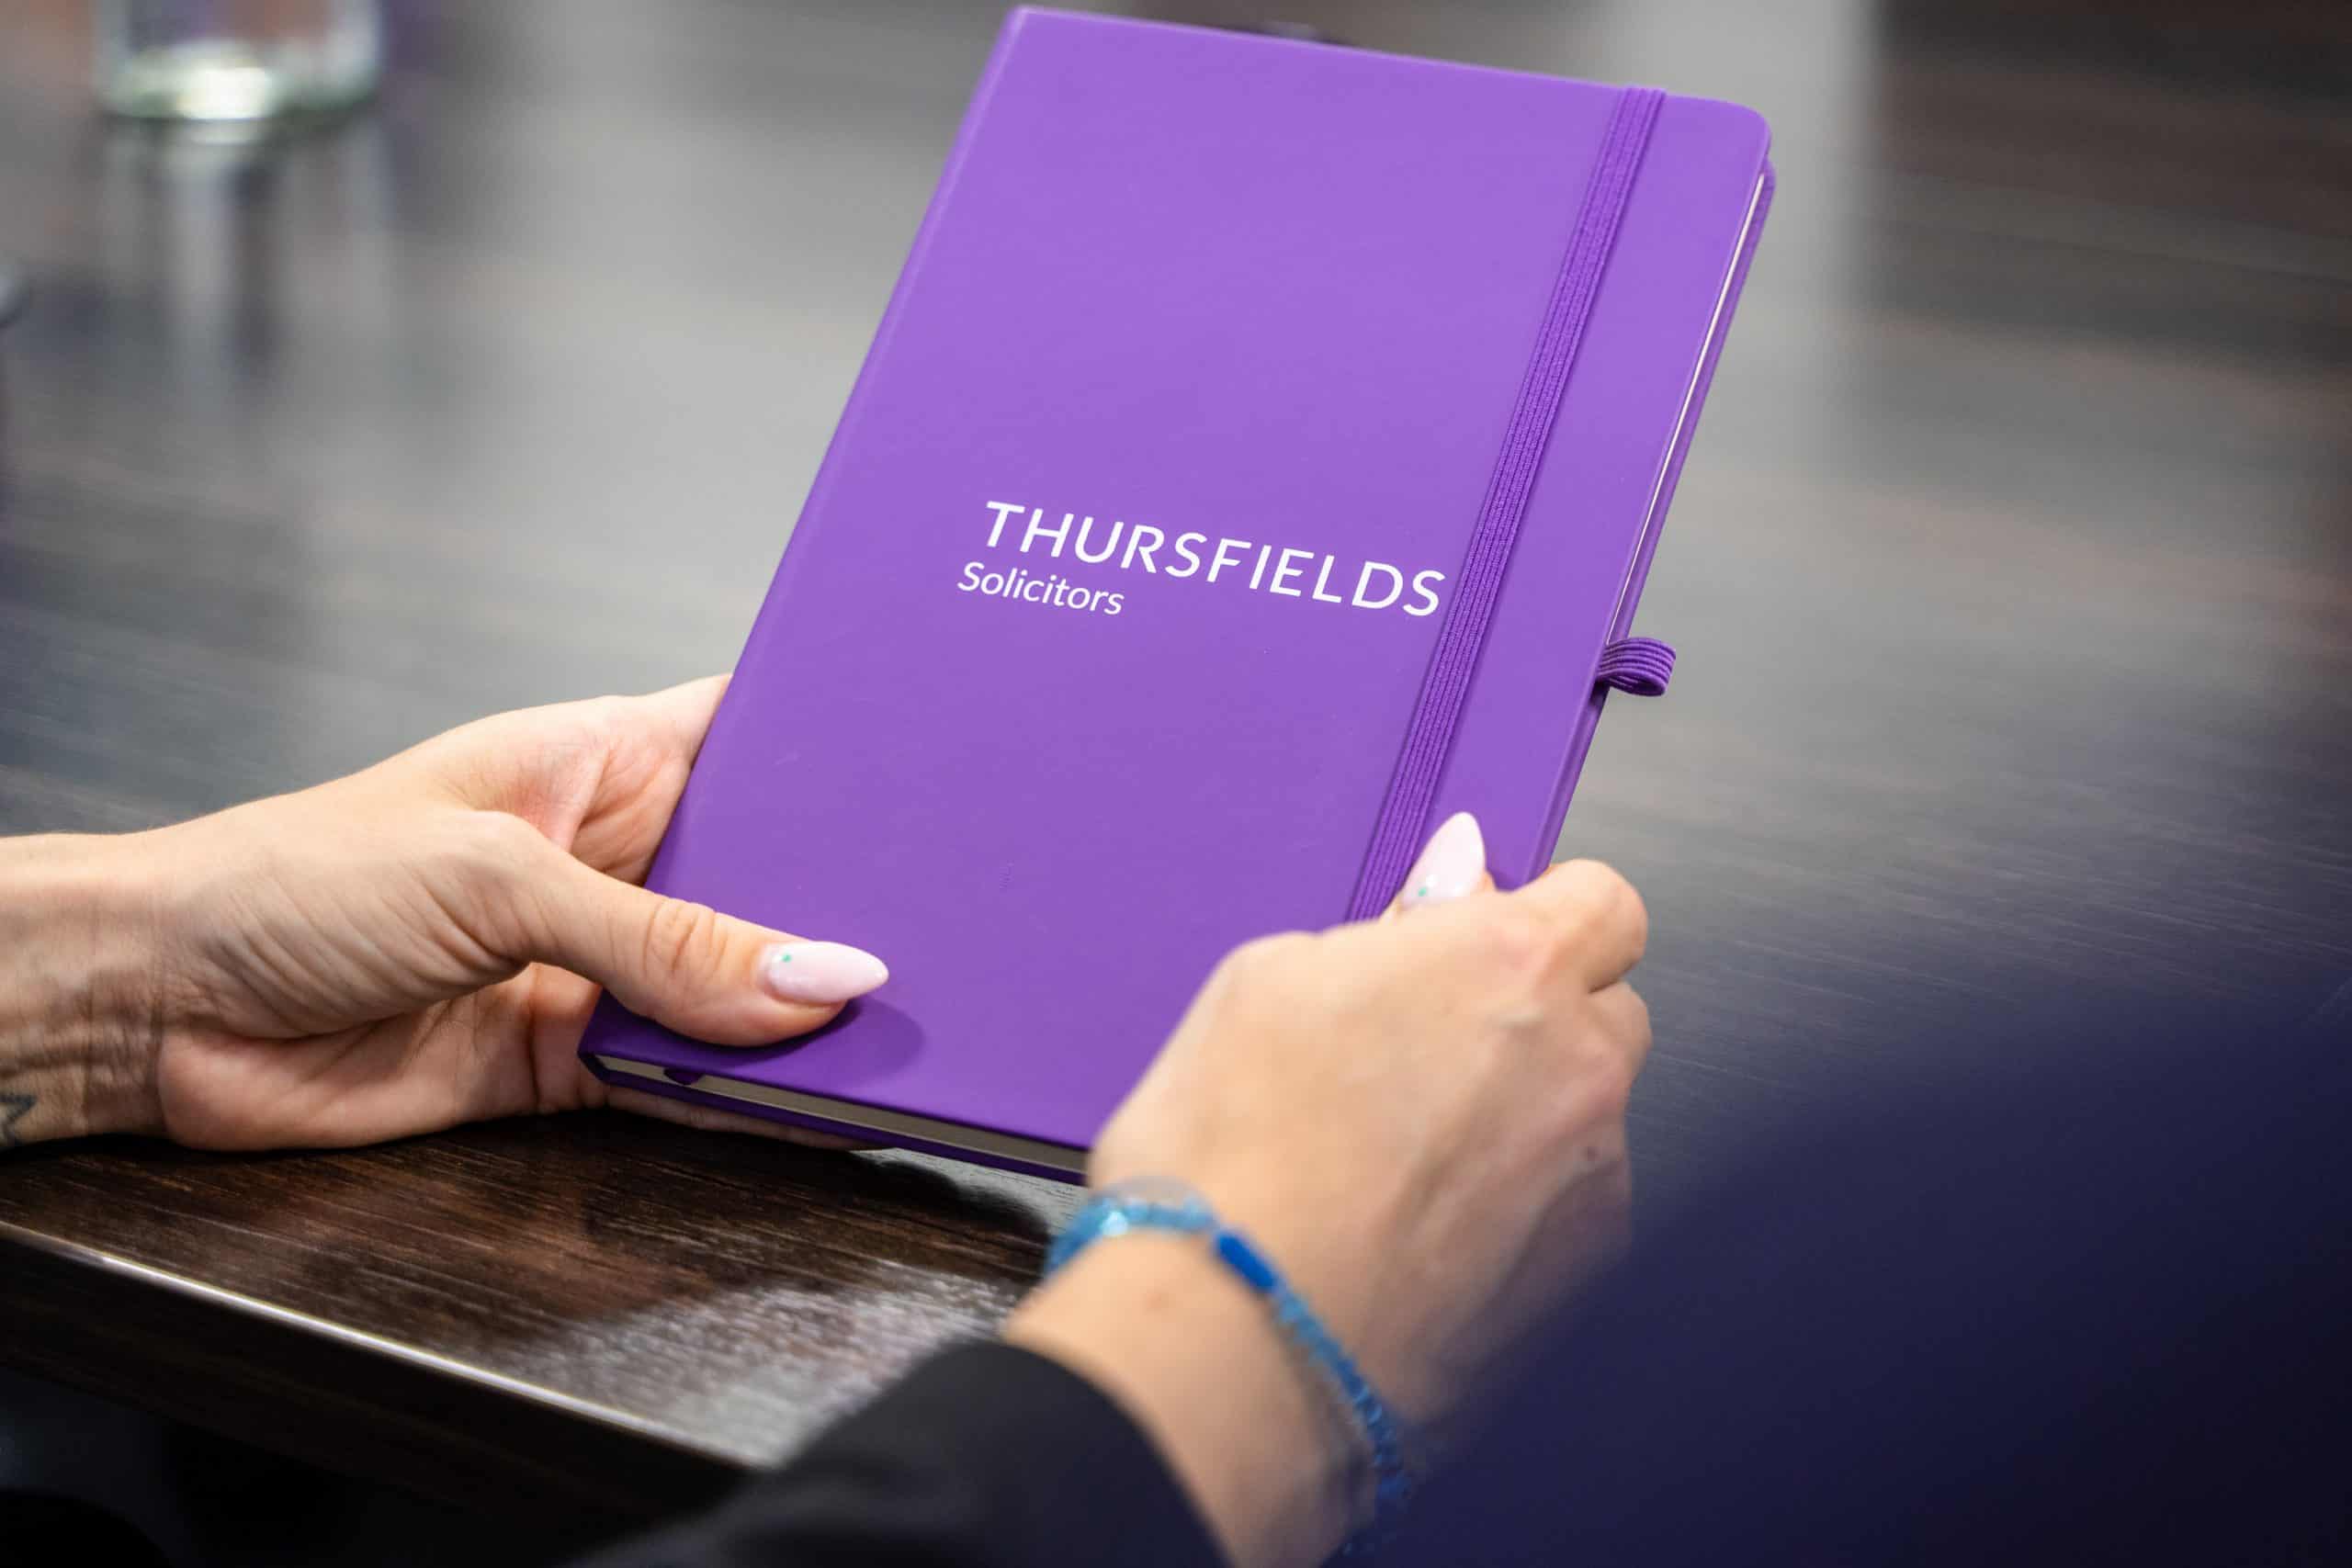 Thursfields Solicitors – 10% Discount on Legal Fees